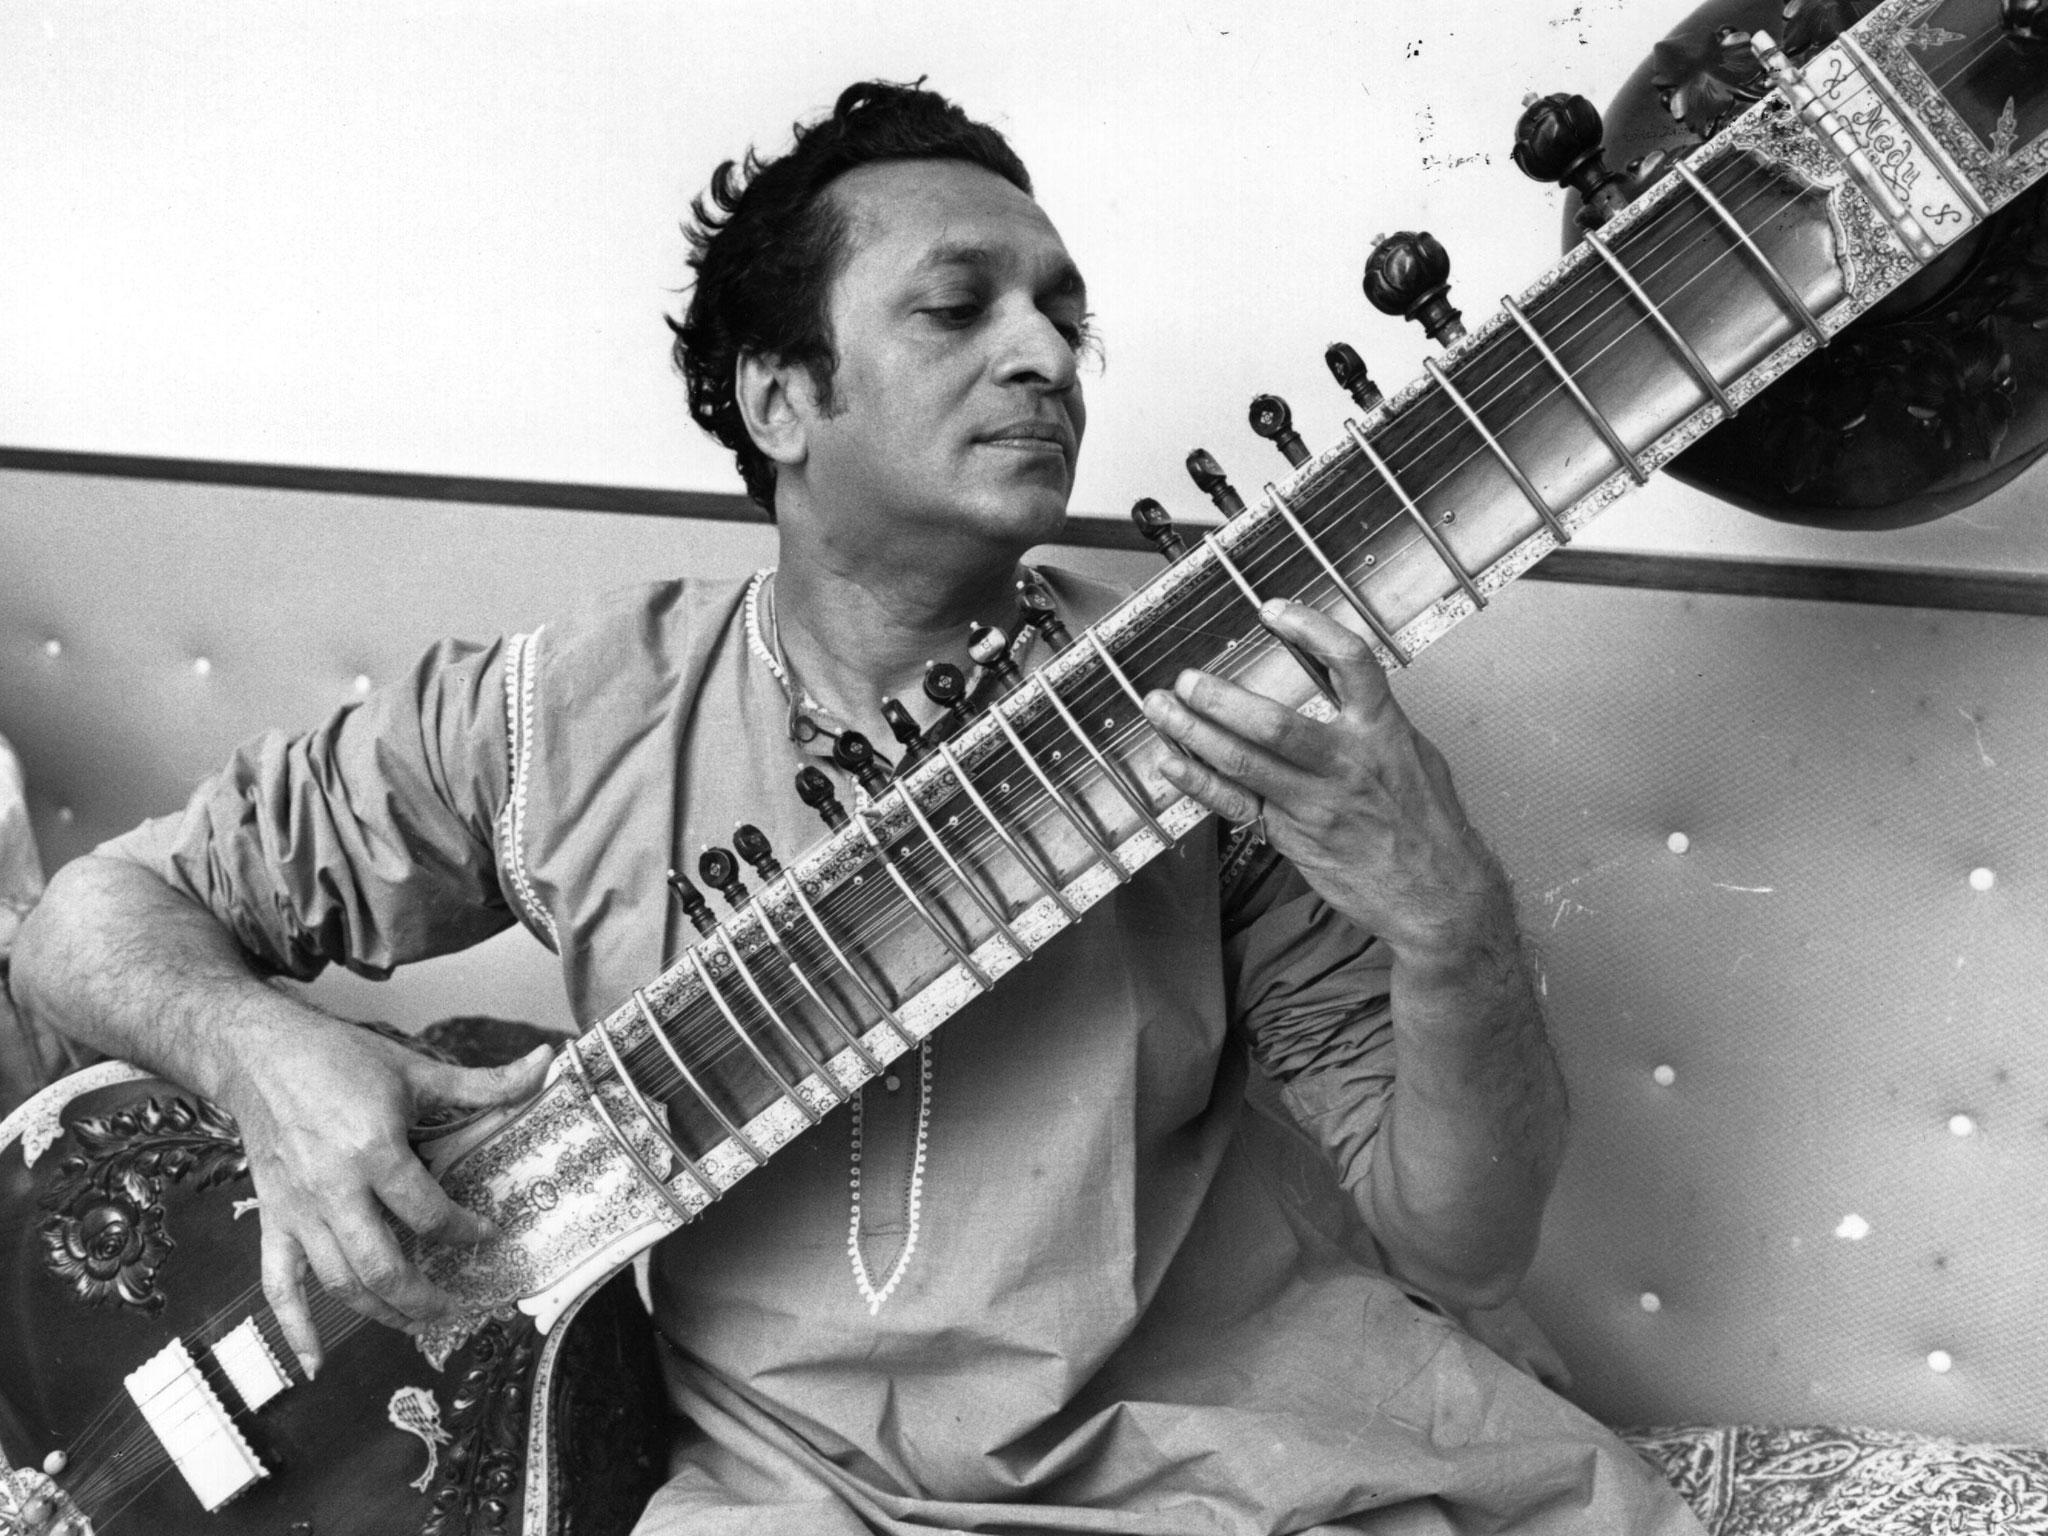 Ravi Shanka would have been 96 years old today